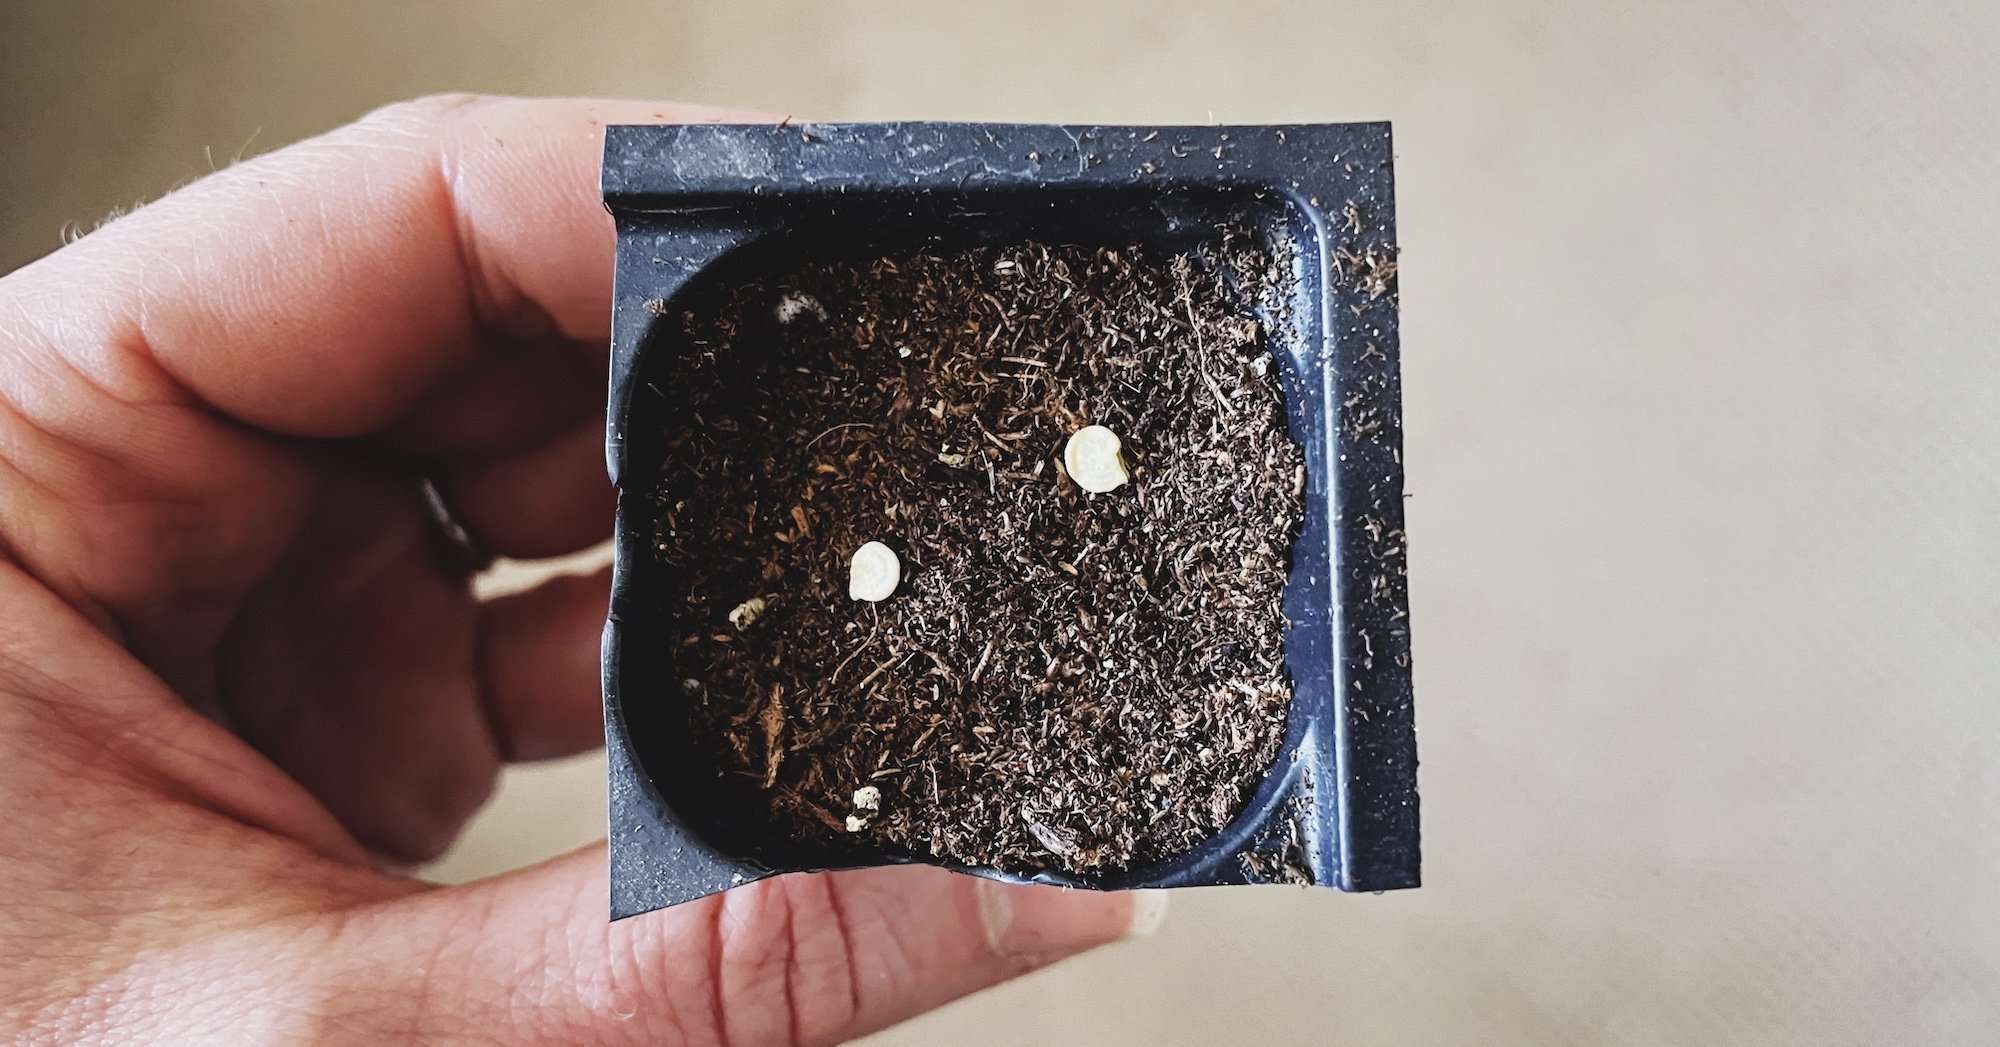 2 pepper seeds placed in a 1.5" pot of soil